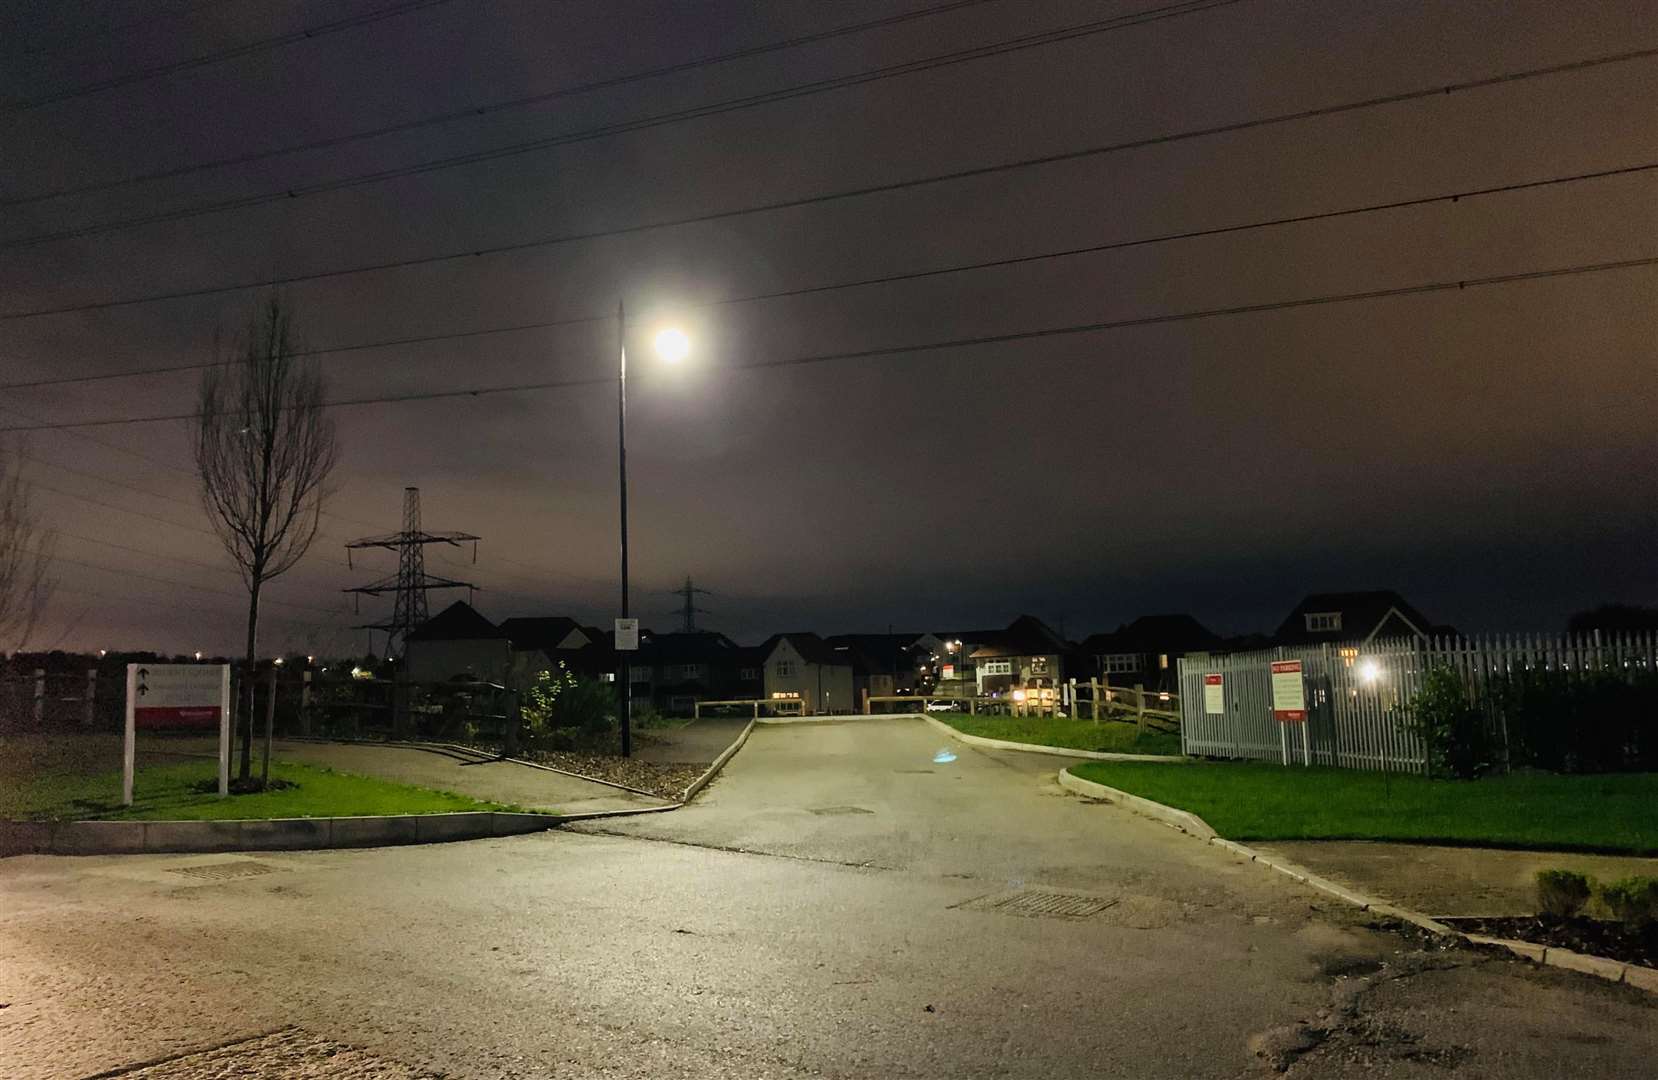 Stopers Avenue in Ebbsfleet Garden City, where Irma Lisauskaite reported her dog received an electric shock